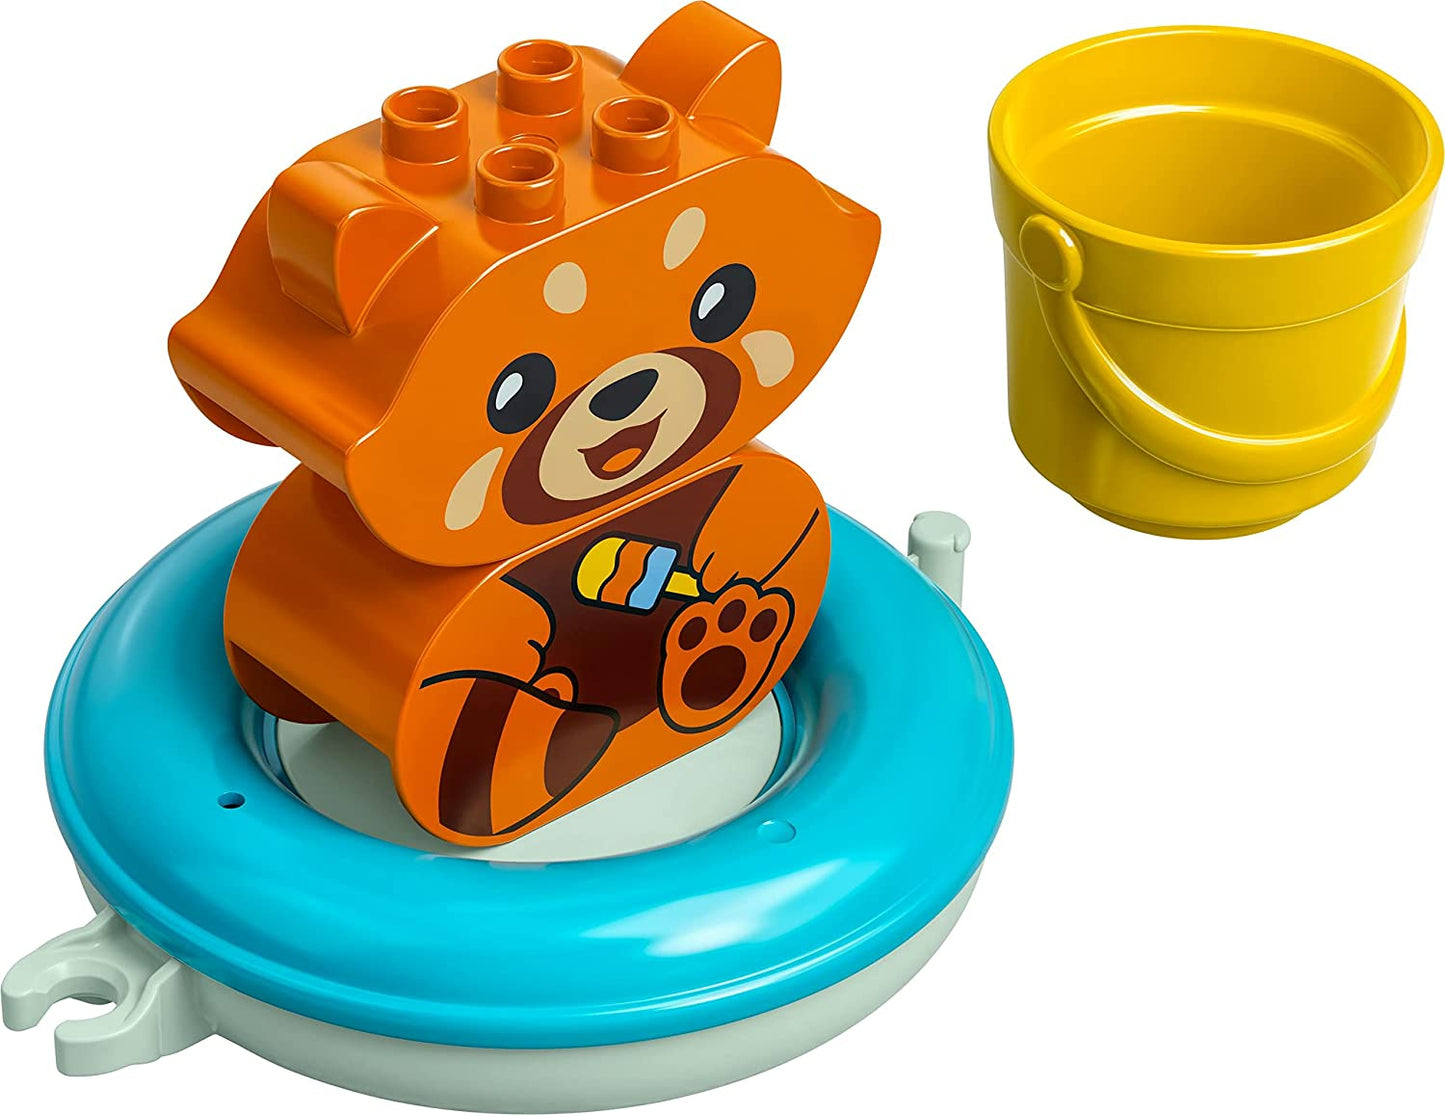 LEGO DUPLO My First Bath Time Fun: Floating Red Panda Building Toy